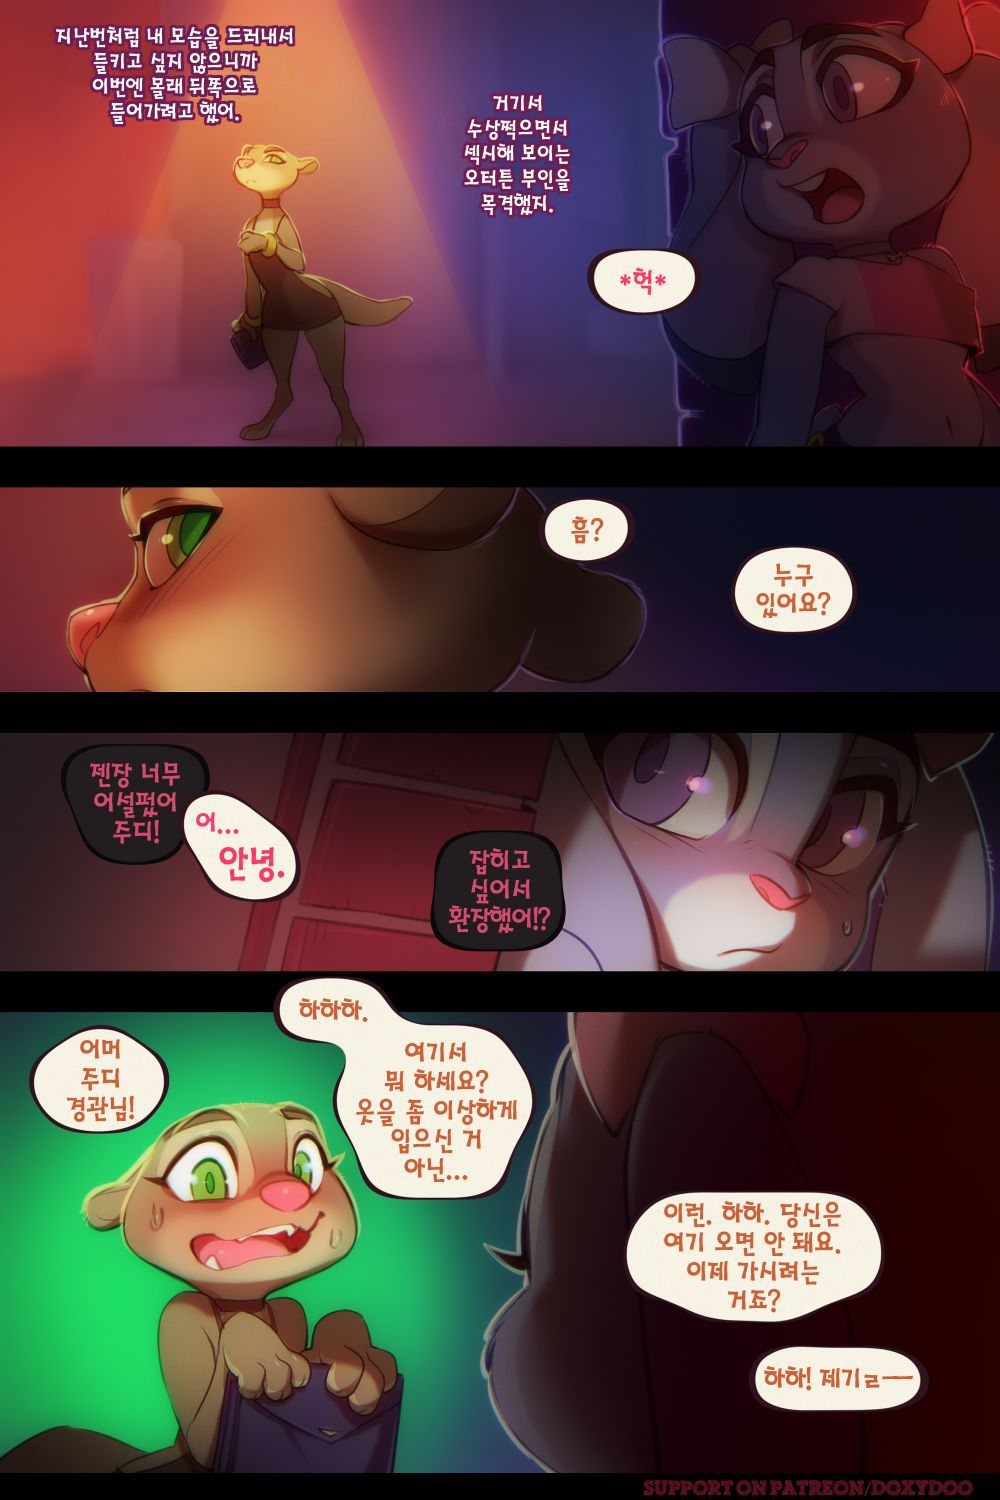 [Doxy] Sweet Sting Part 2: Down The Rabbit Hole | 달콤한 함정수사 2부: 토끼 굴속으로 (Zootopia) [Korean] [Ongoing] 8